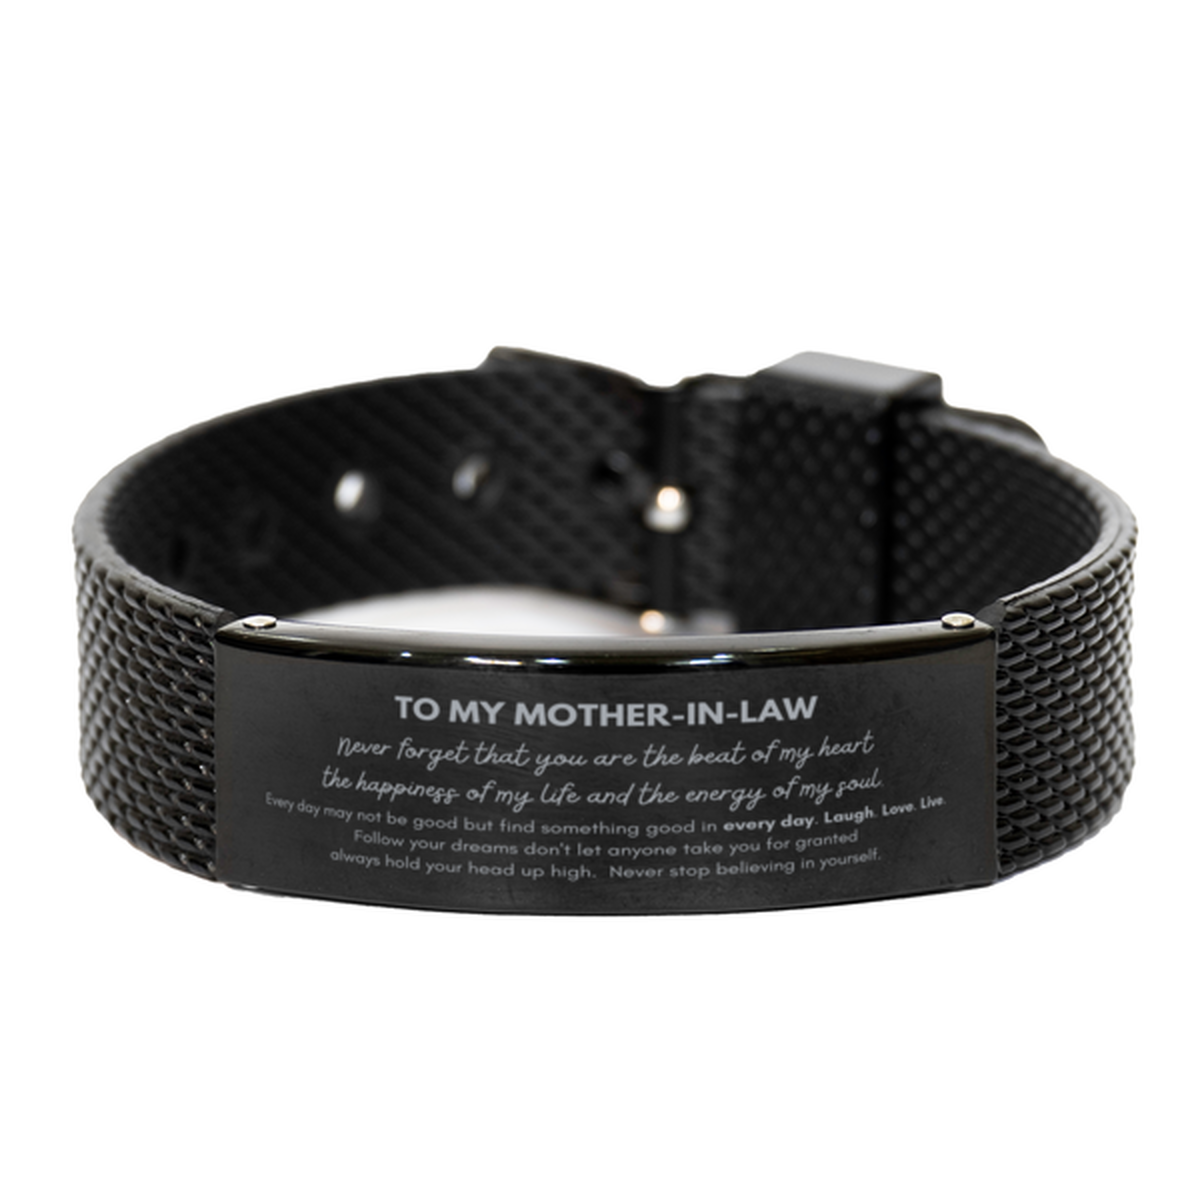 To My Mother-In-Law Bracelet Gifts, Christmas Mother-In-Law Black Shark Mesh Bracelet Present, Birthday Unique Motivational For Mother-In-Law, To My Mother-In-Law Never forget that you are the beat of my heart the happiness of my life and the energy of my